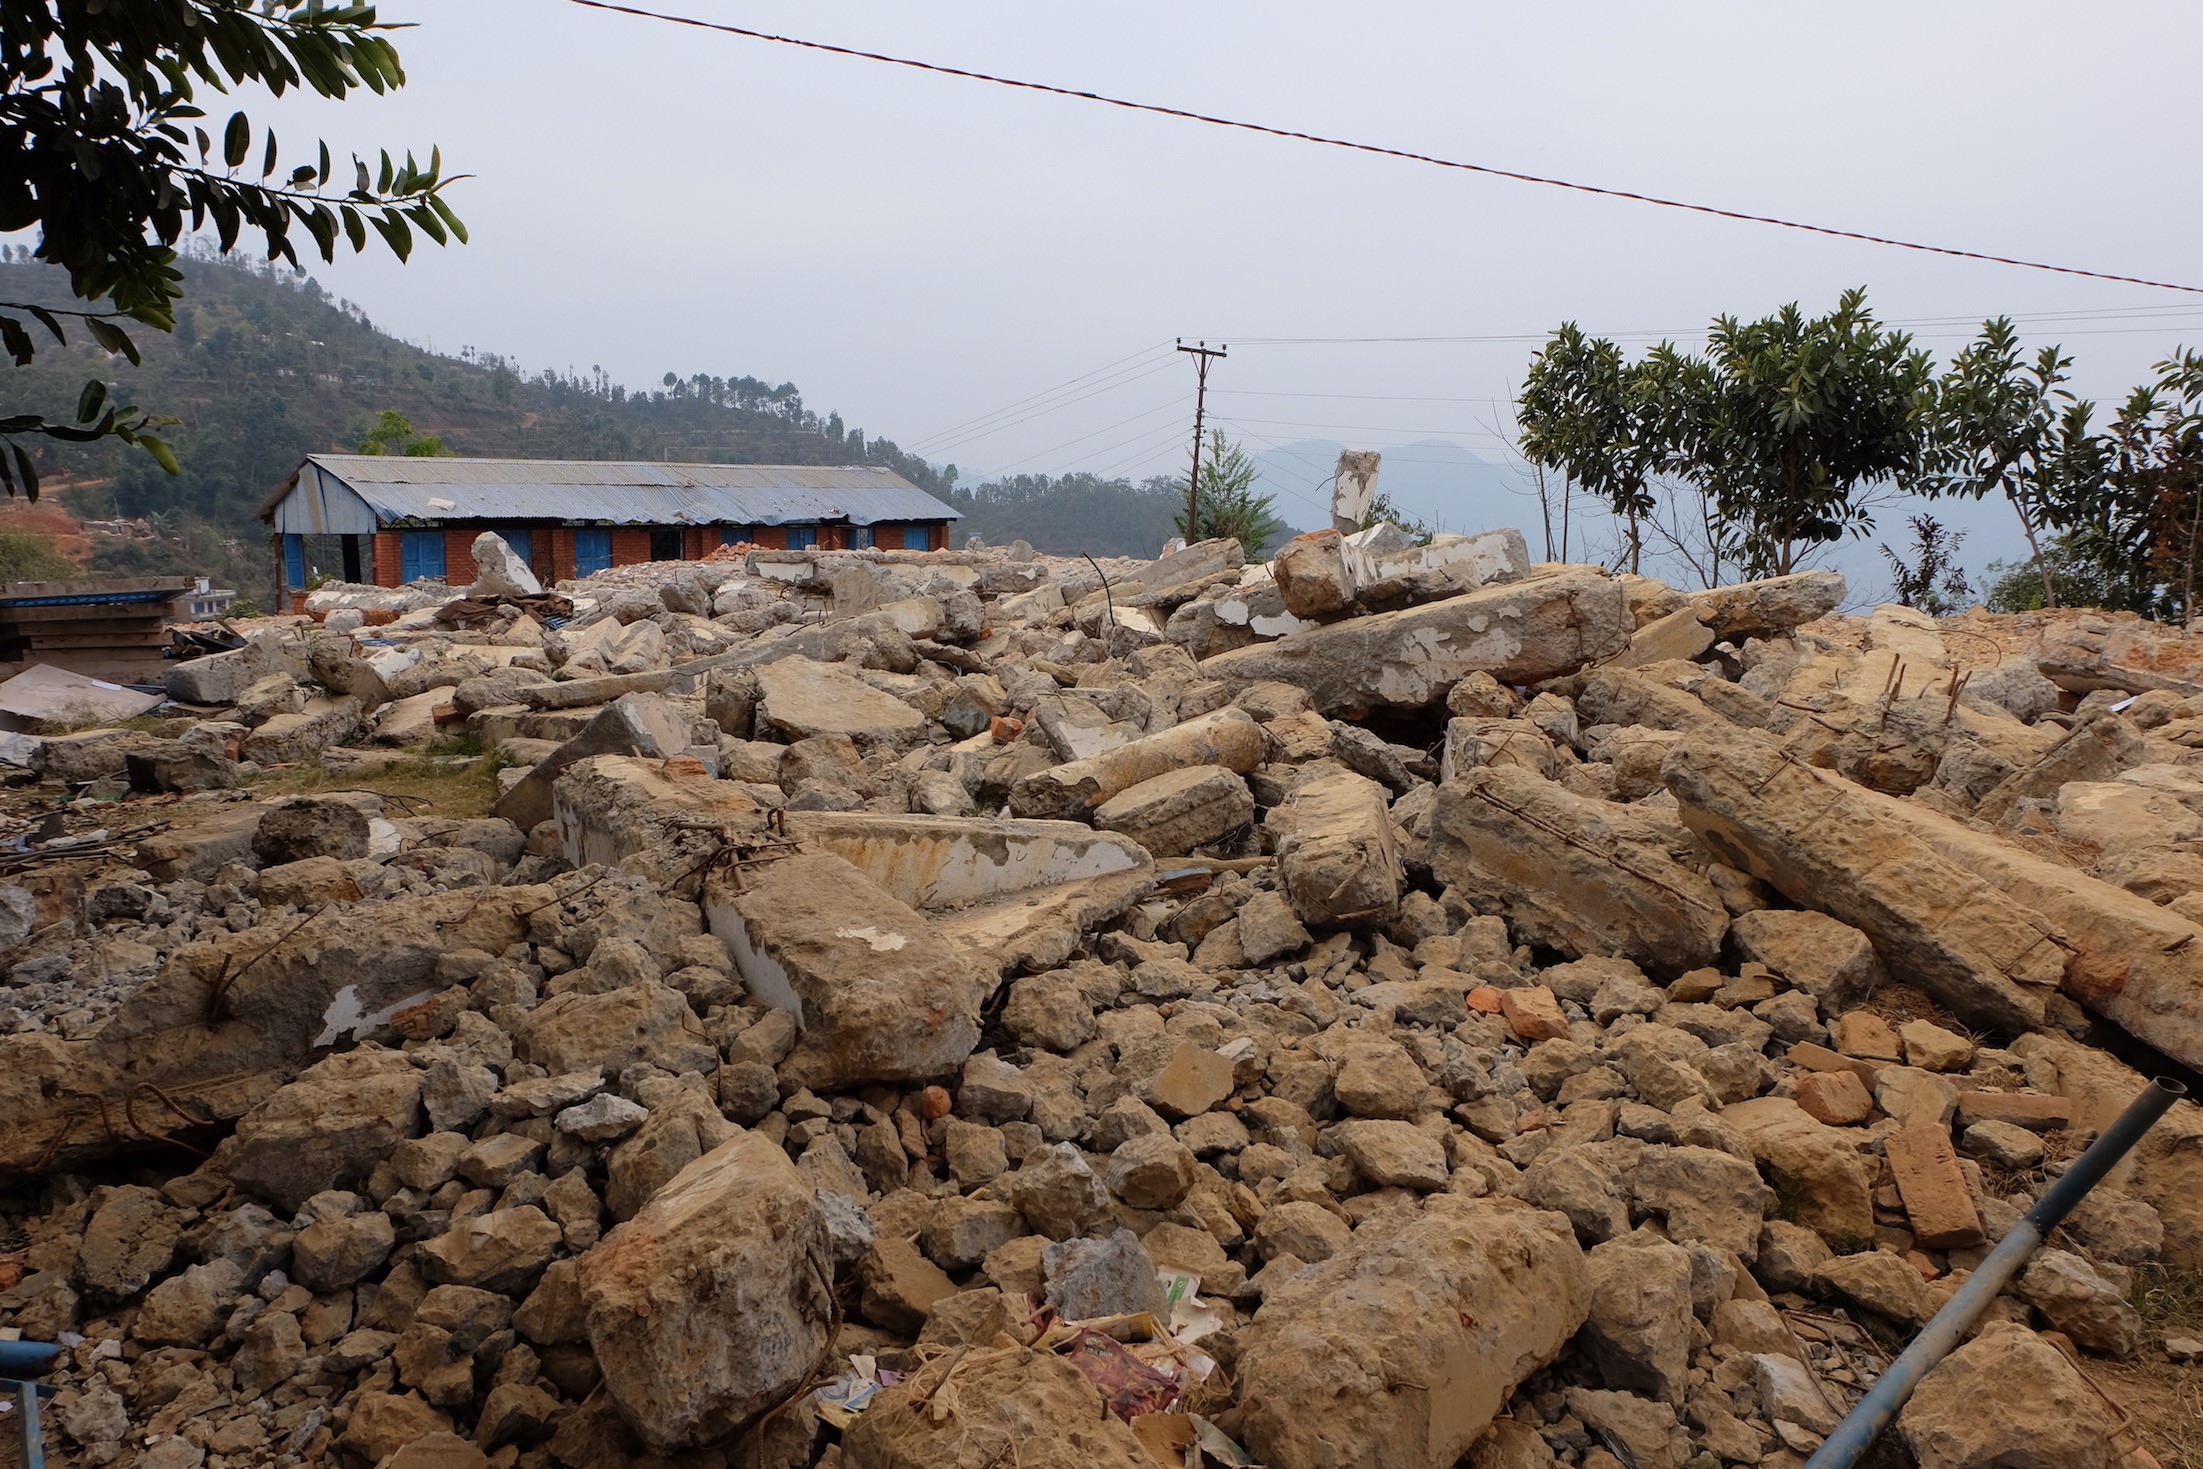 A two-story school used to stand at this site in Sindupalchowk District. Most of the walls collapsed and the frame was damaged in the earthquake. What was left of the structure was demolished to prepare for a new school.